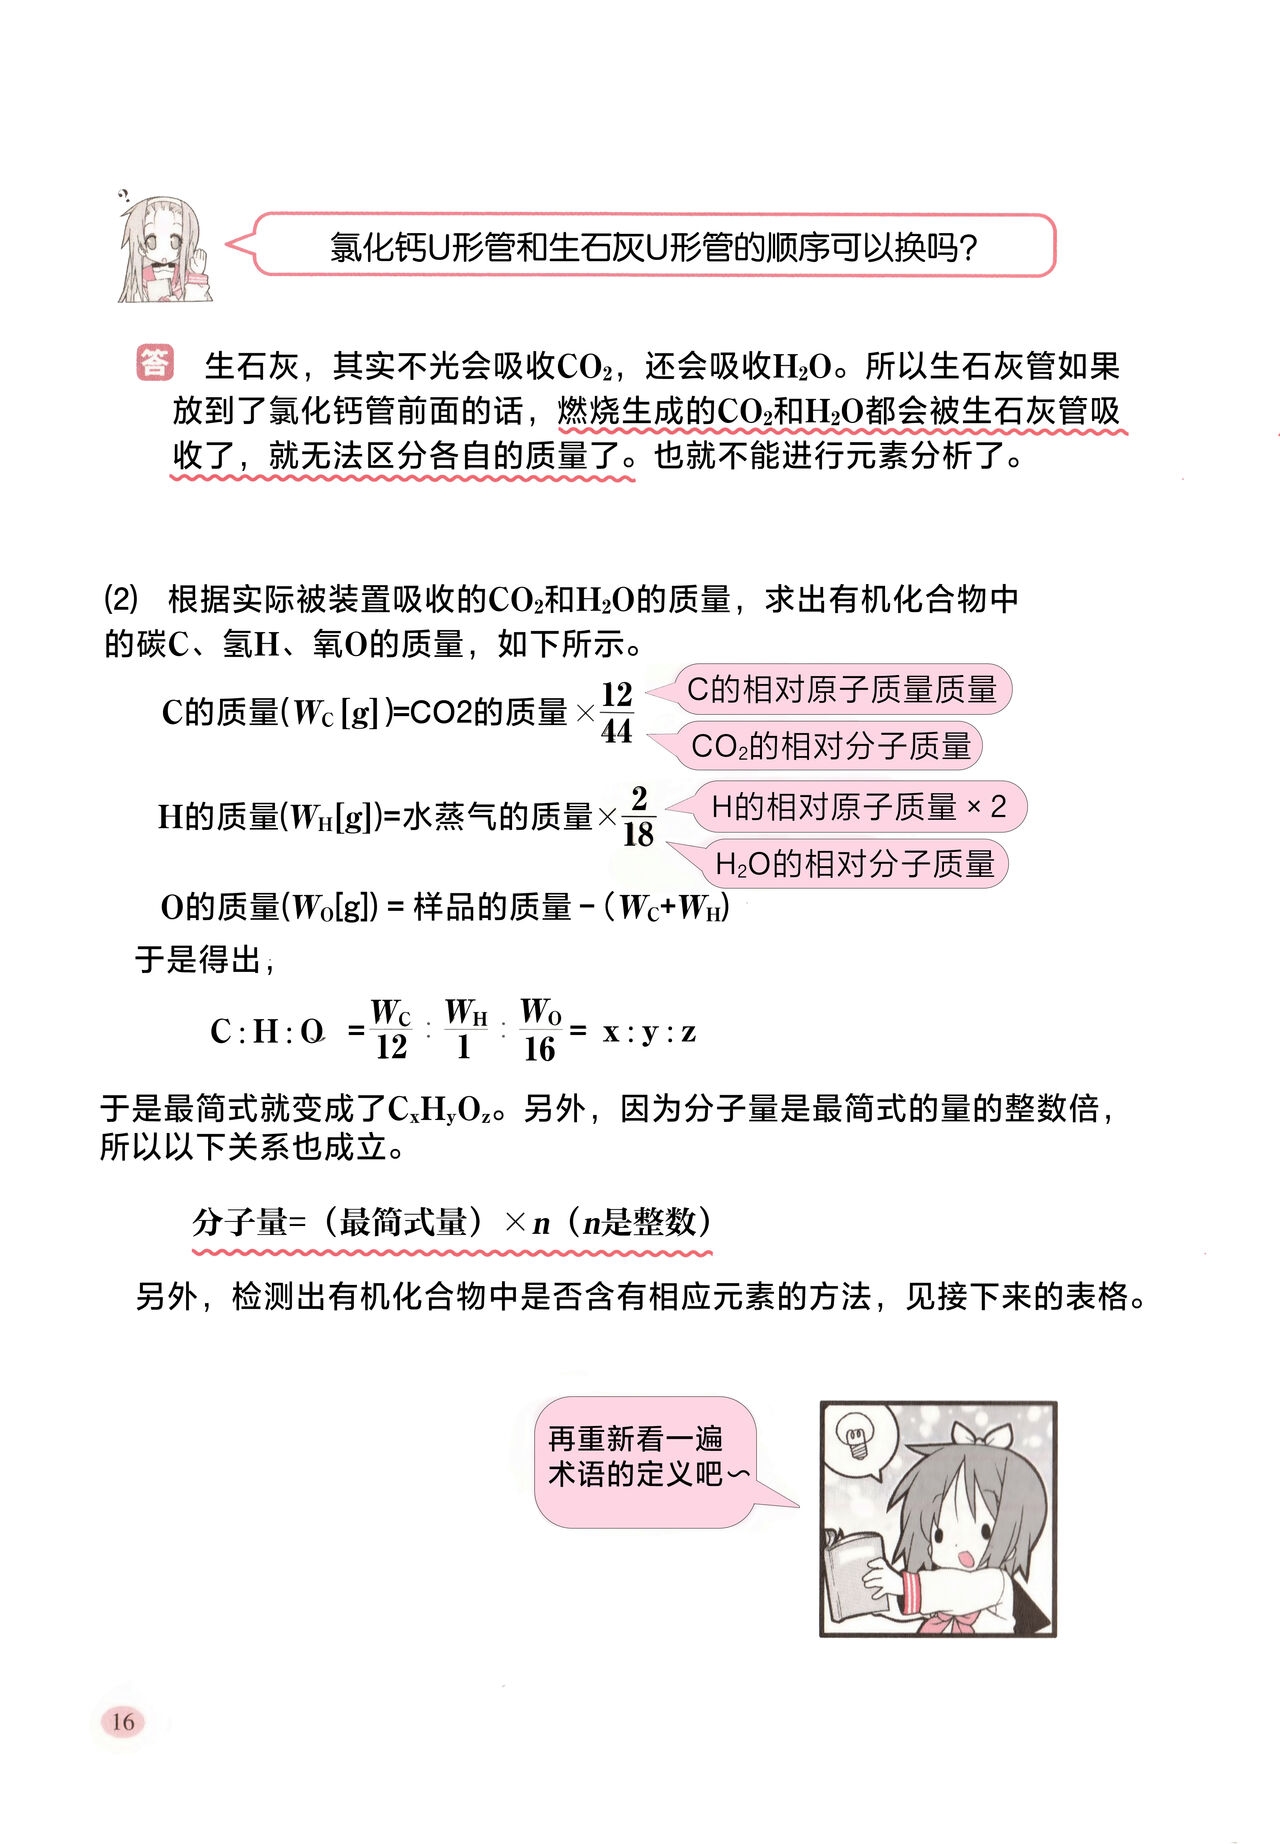 Let's Learn Chemistry with Lucky☆Star -organic matter- Section 1|和幸运星一起学化学 -有机篇- 第1章[Chinese][砂時計漢化組] 24